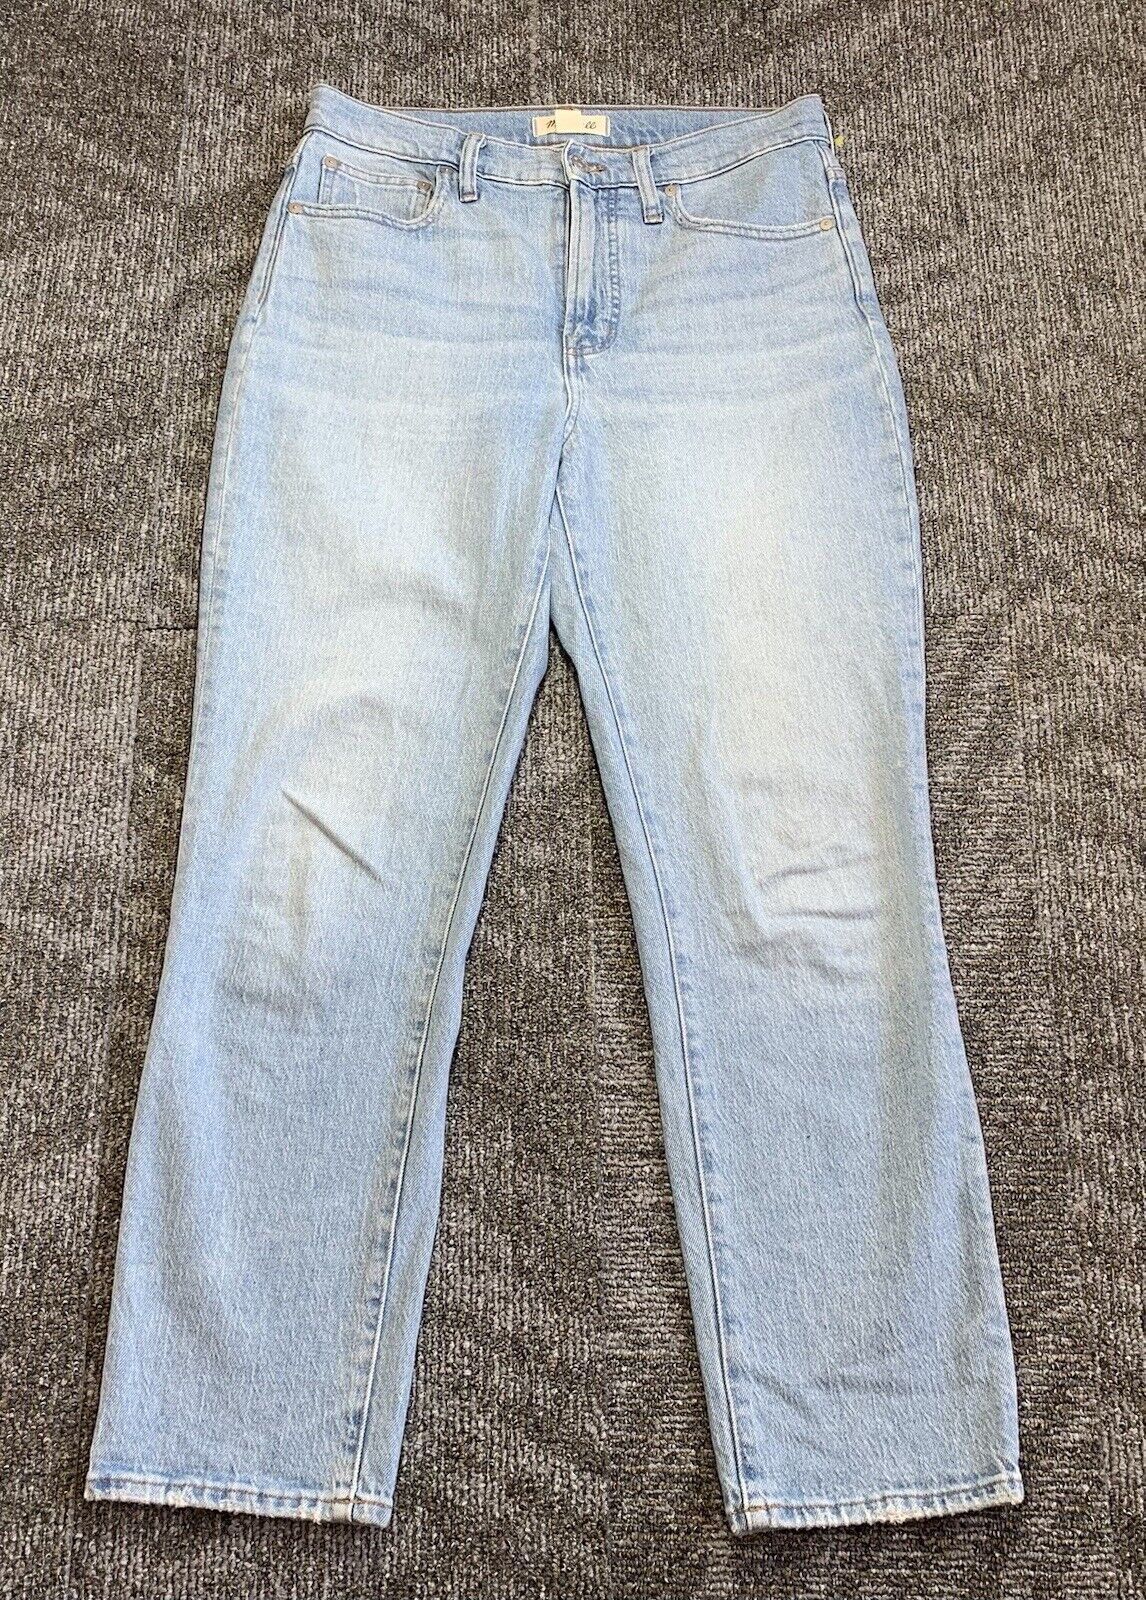 Madewell Jeans Women’s 28 Blue The Perfect Vintage Light Wash Denim Comfortable